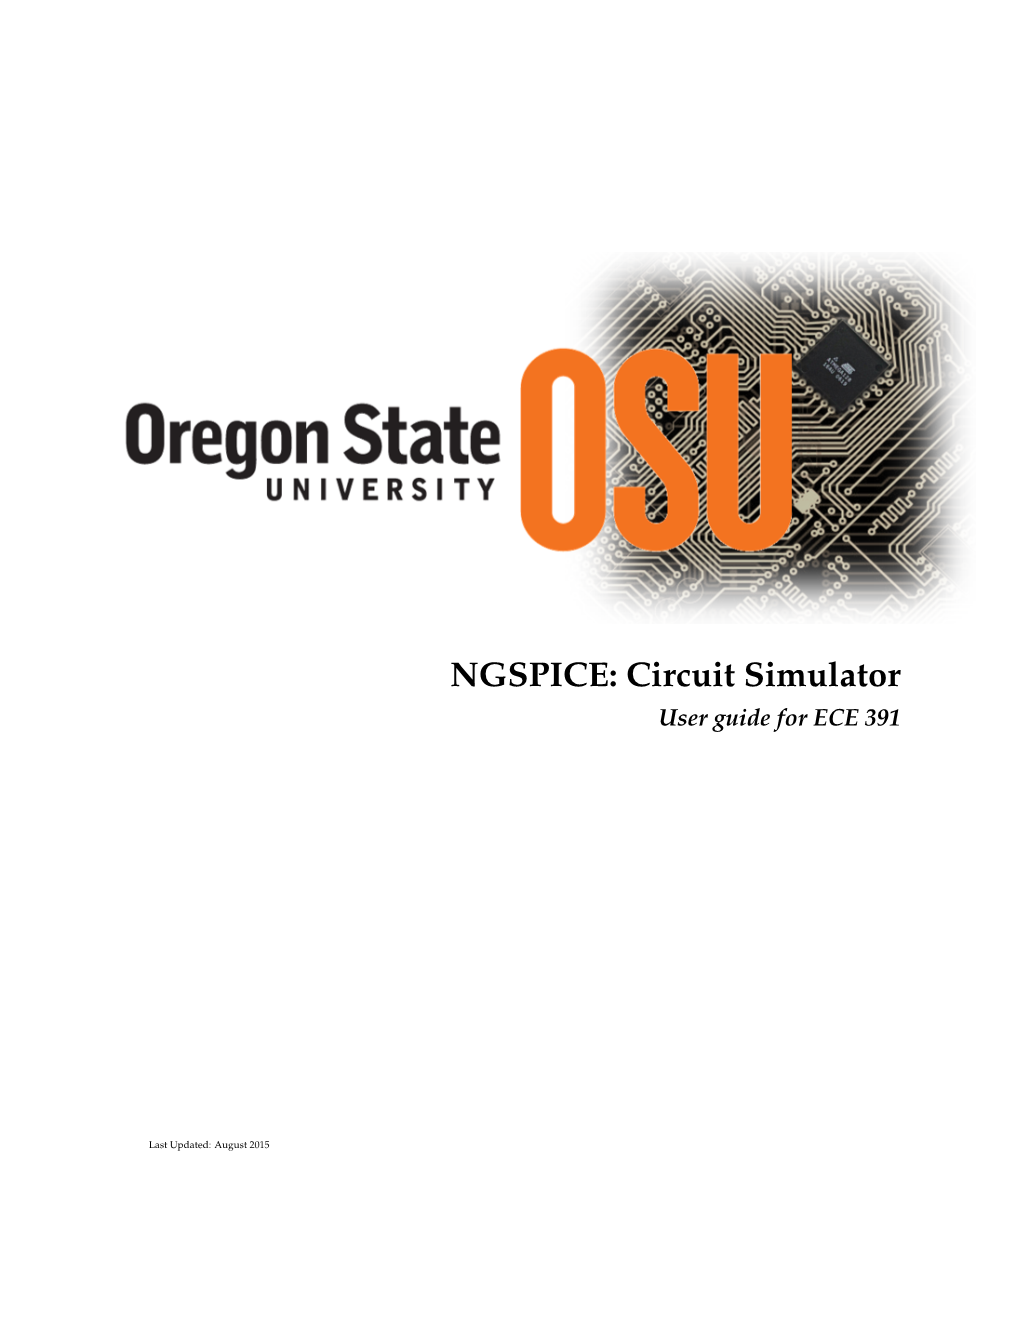 NGSPICE: Circuit Simulator User Guide for ECE 391